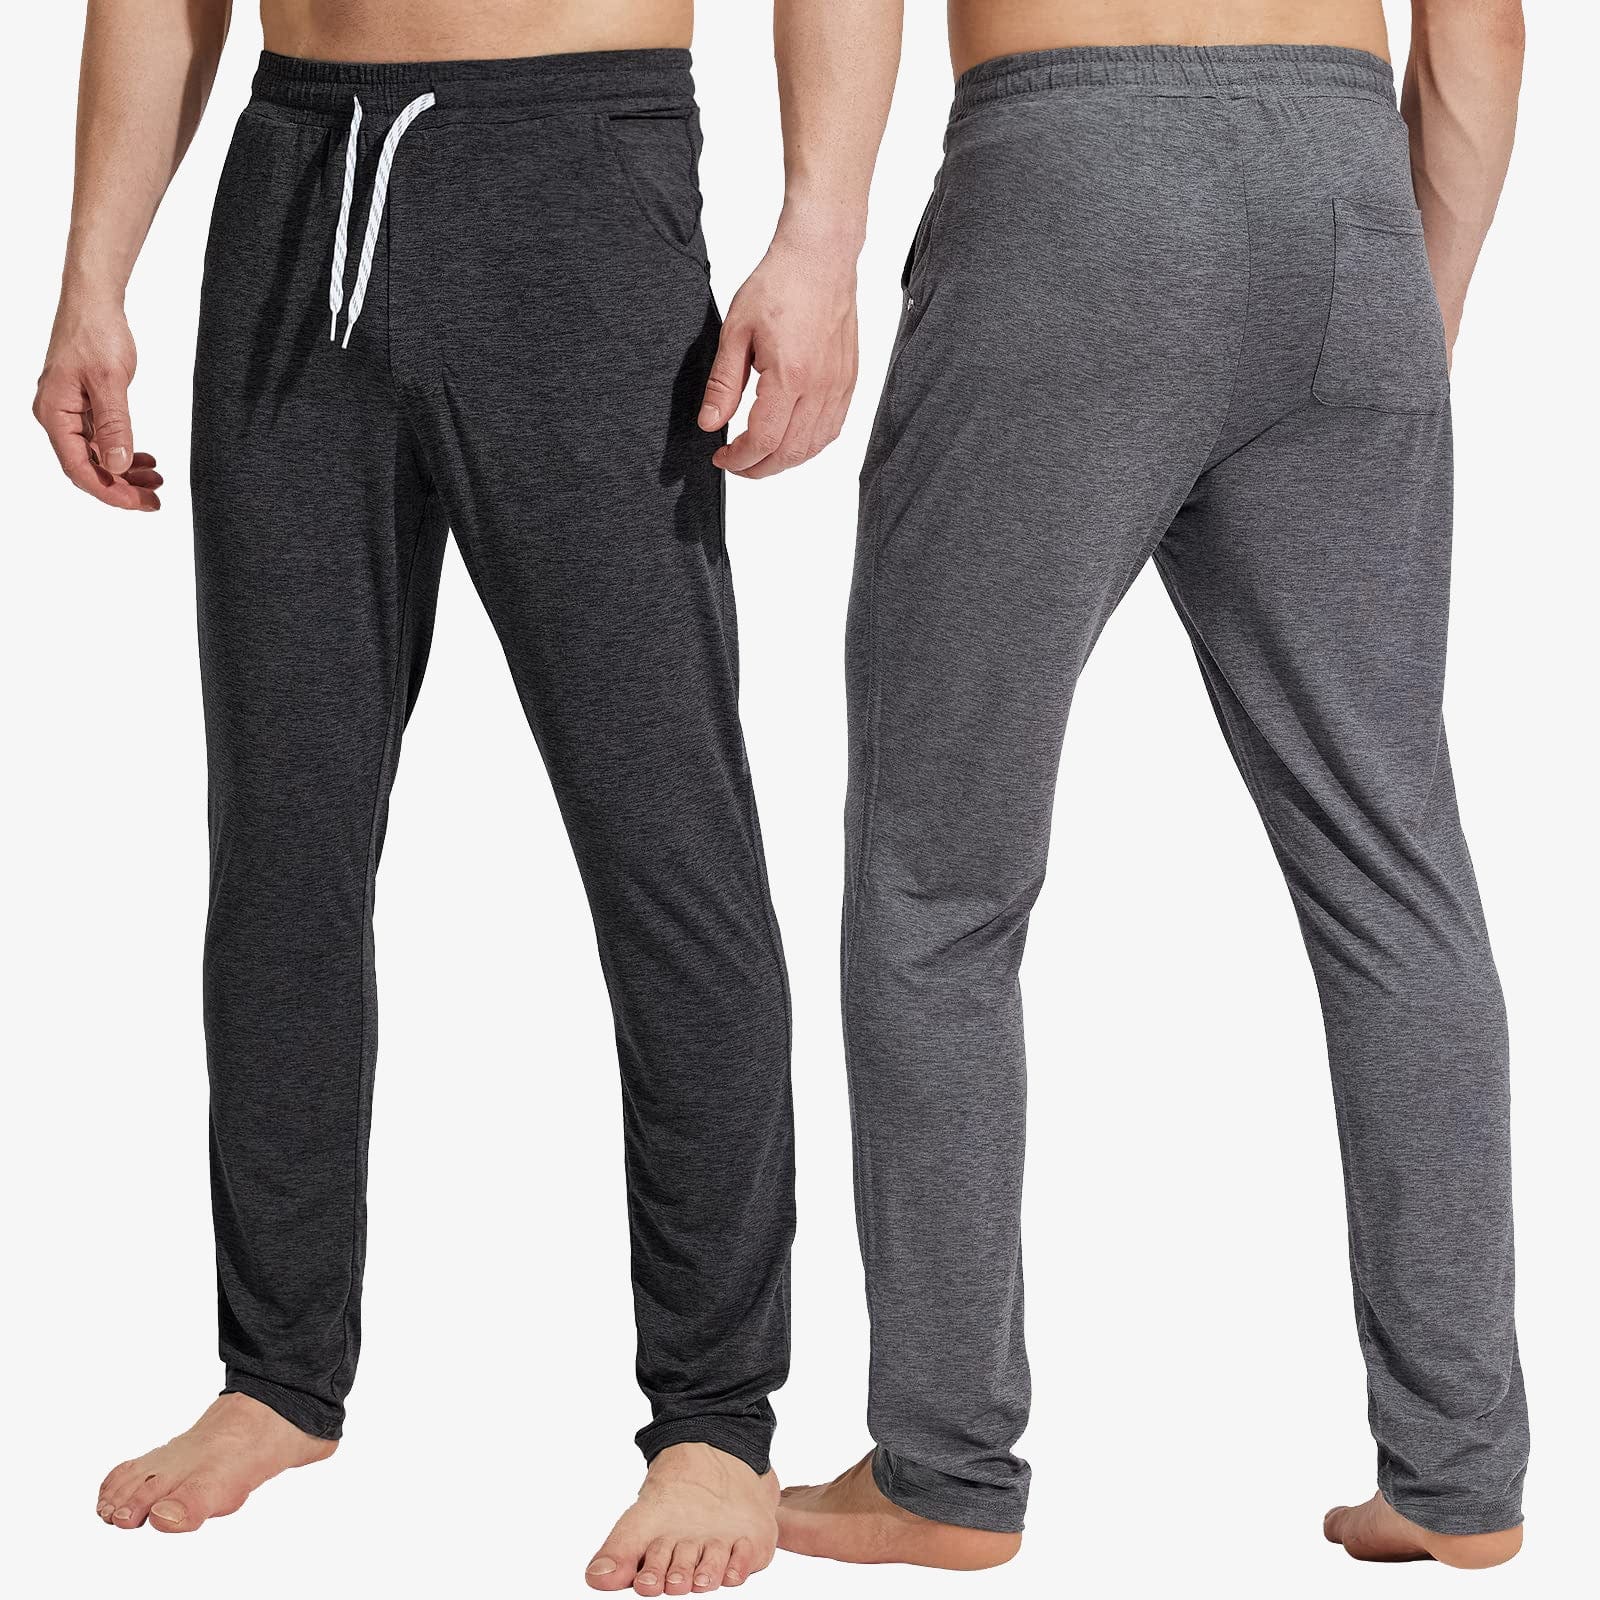 Men Lightweight Soft Athletic Track Pants with Pockets Open Bottom Men Train Pants Black Charcoal / S MIER